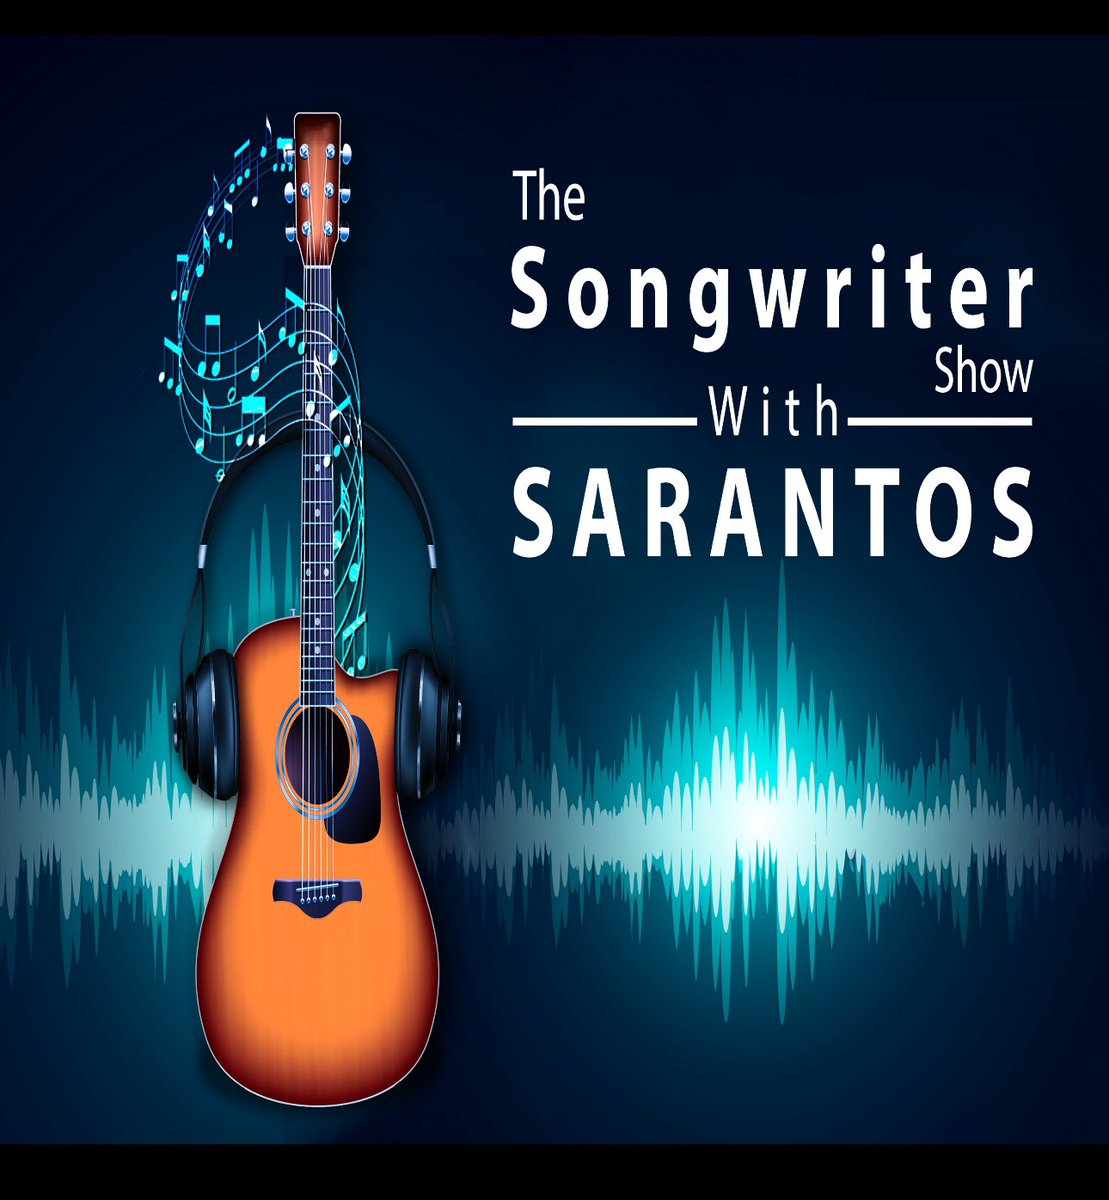 Check out my new interview tonight with Joe Hicks on The Songwriter Show

#JoeHicks #iHeartRadio #interview #interviews #radio #radioshow #radiointerview #iheart #podcast #podcasts #PodcastAndChill #radio1 #LiveShows #liveshow #music #thesongwritershow #songwriter #songwriting…